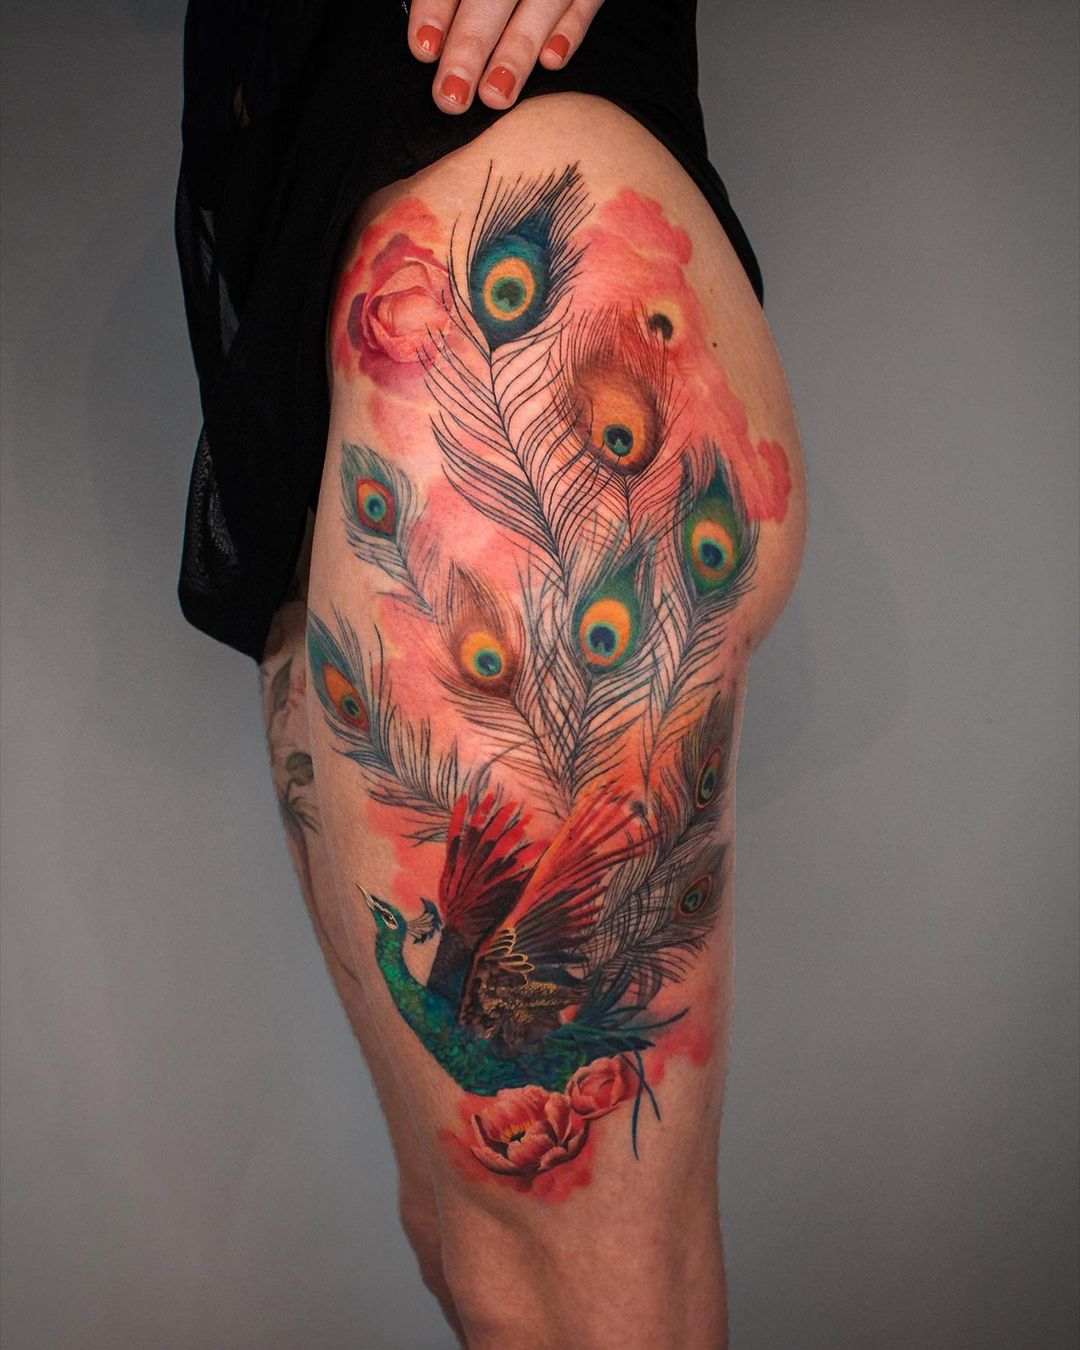 Peacock tattoo on thigh by debrartist